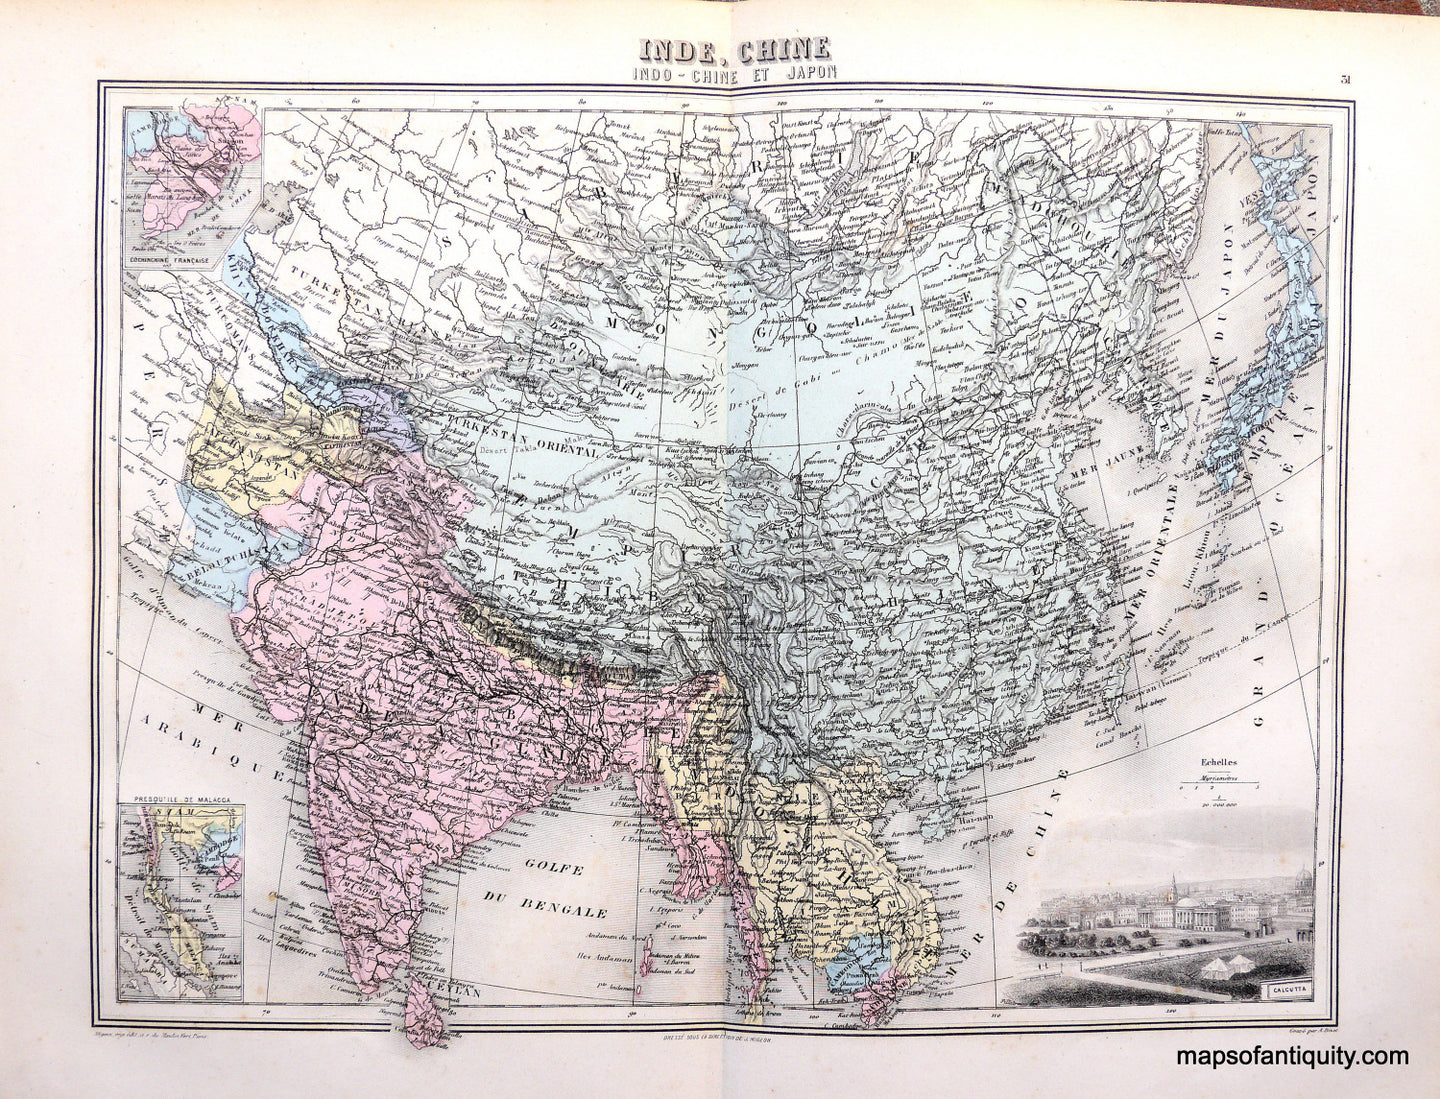 Antique-Hand-Colored-Map-Inde-Chine-Asia--1884-Migeon-Maps-Of-Antiquity